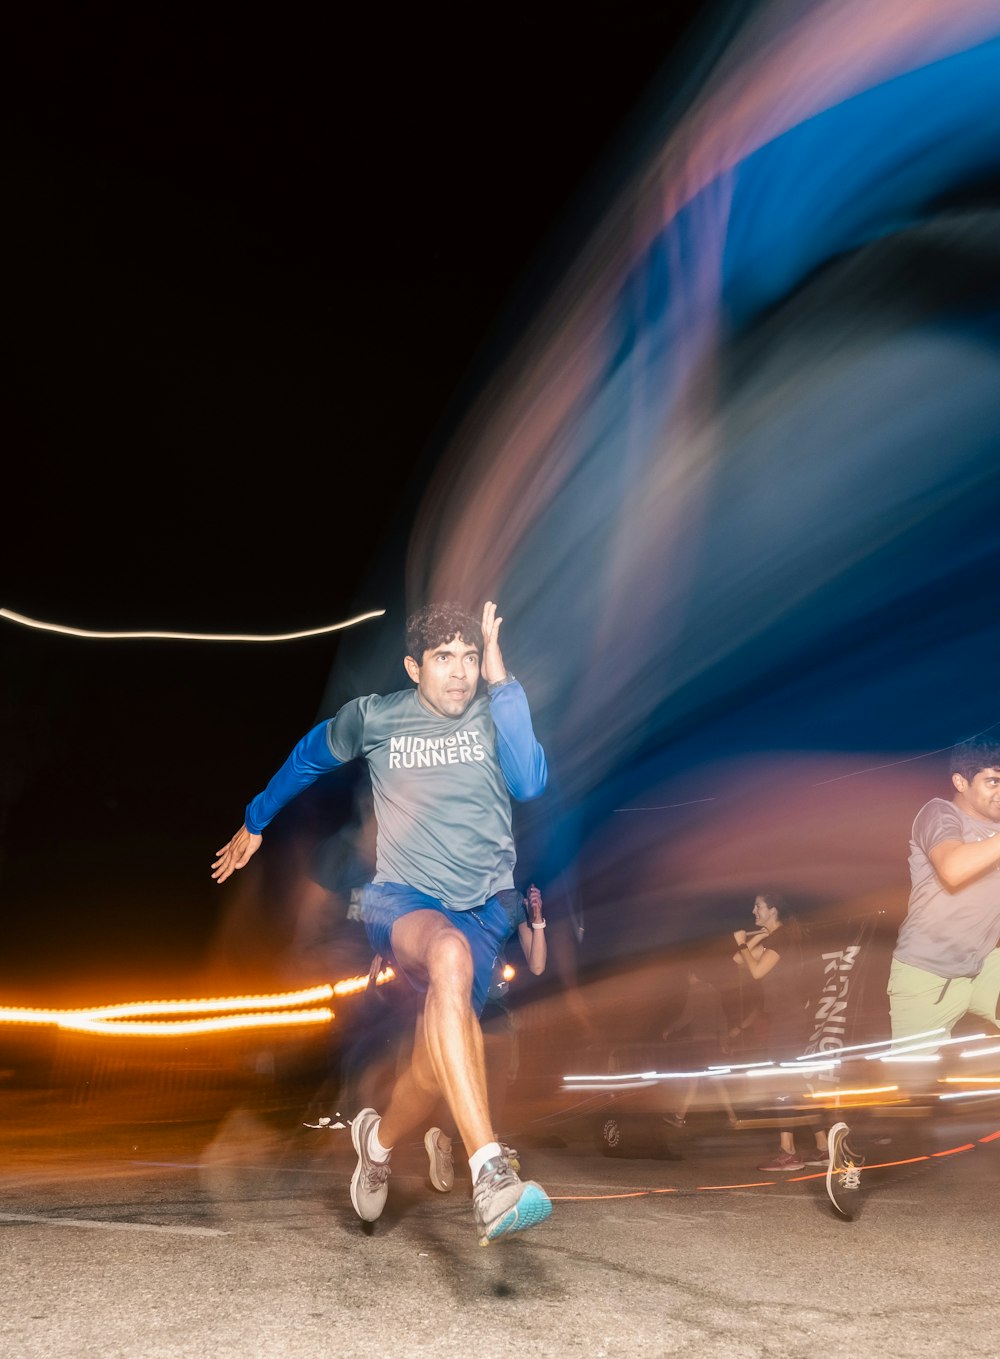 a blurry photo of a man running at night